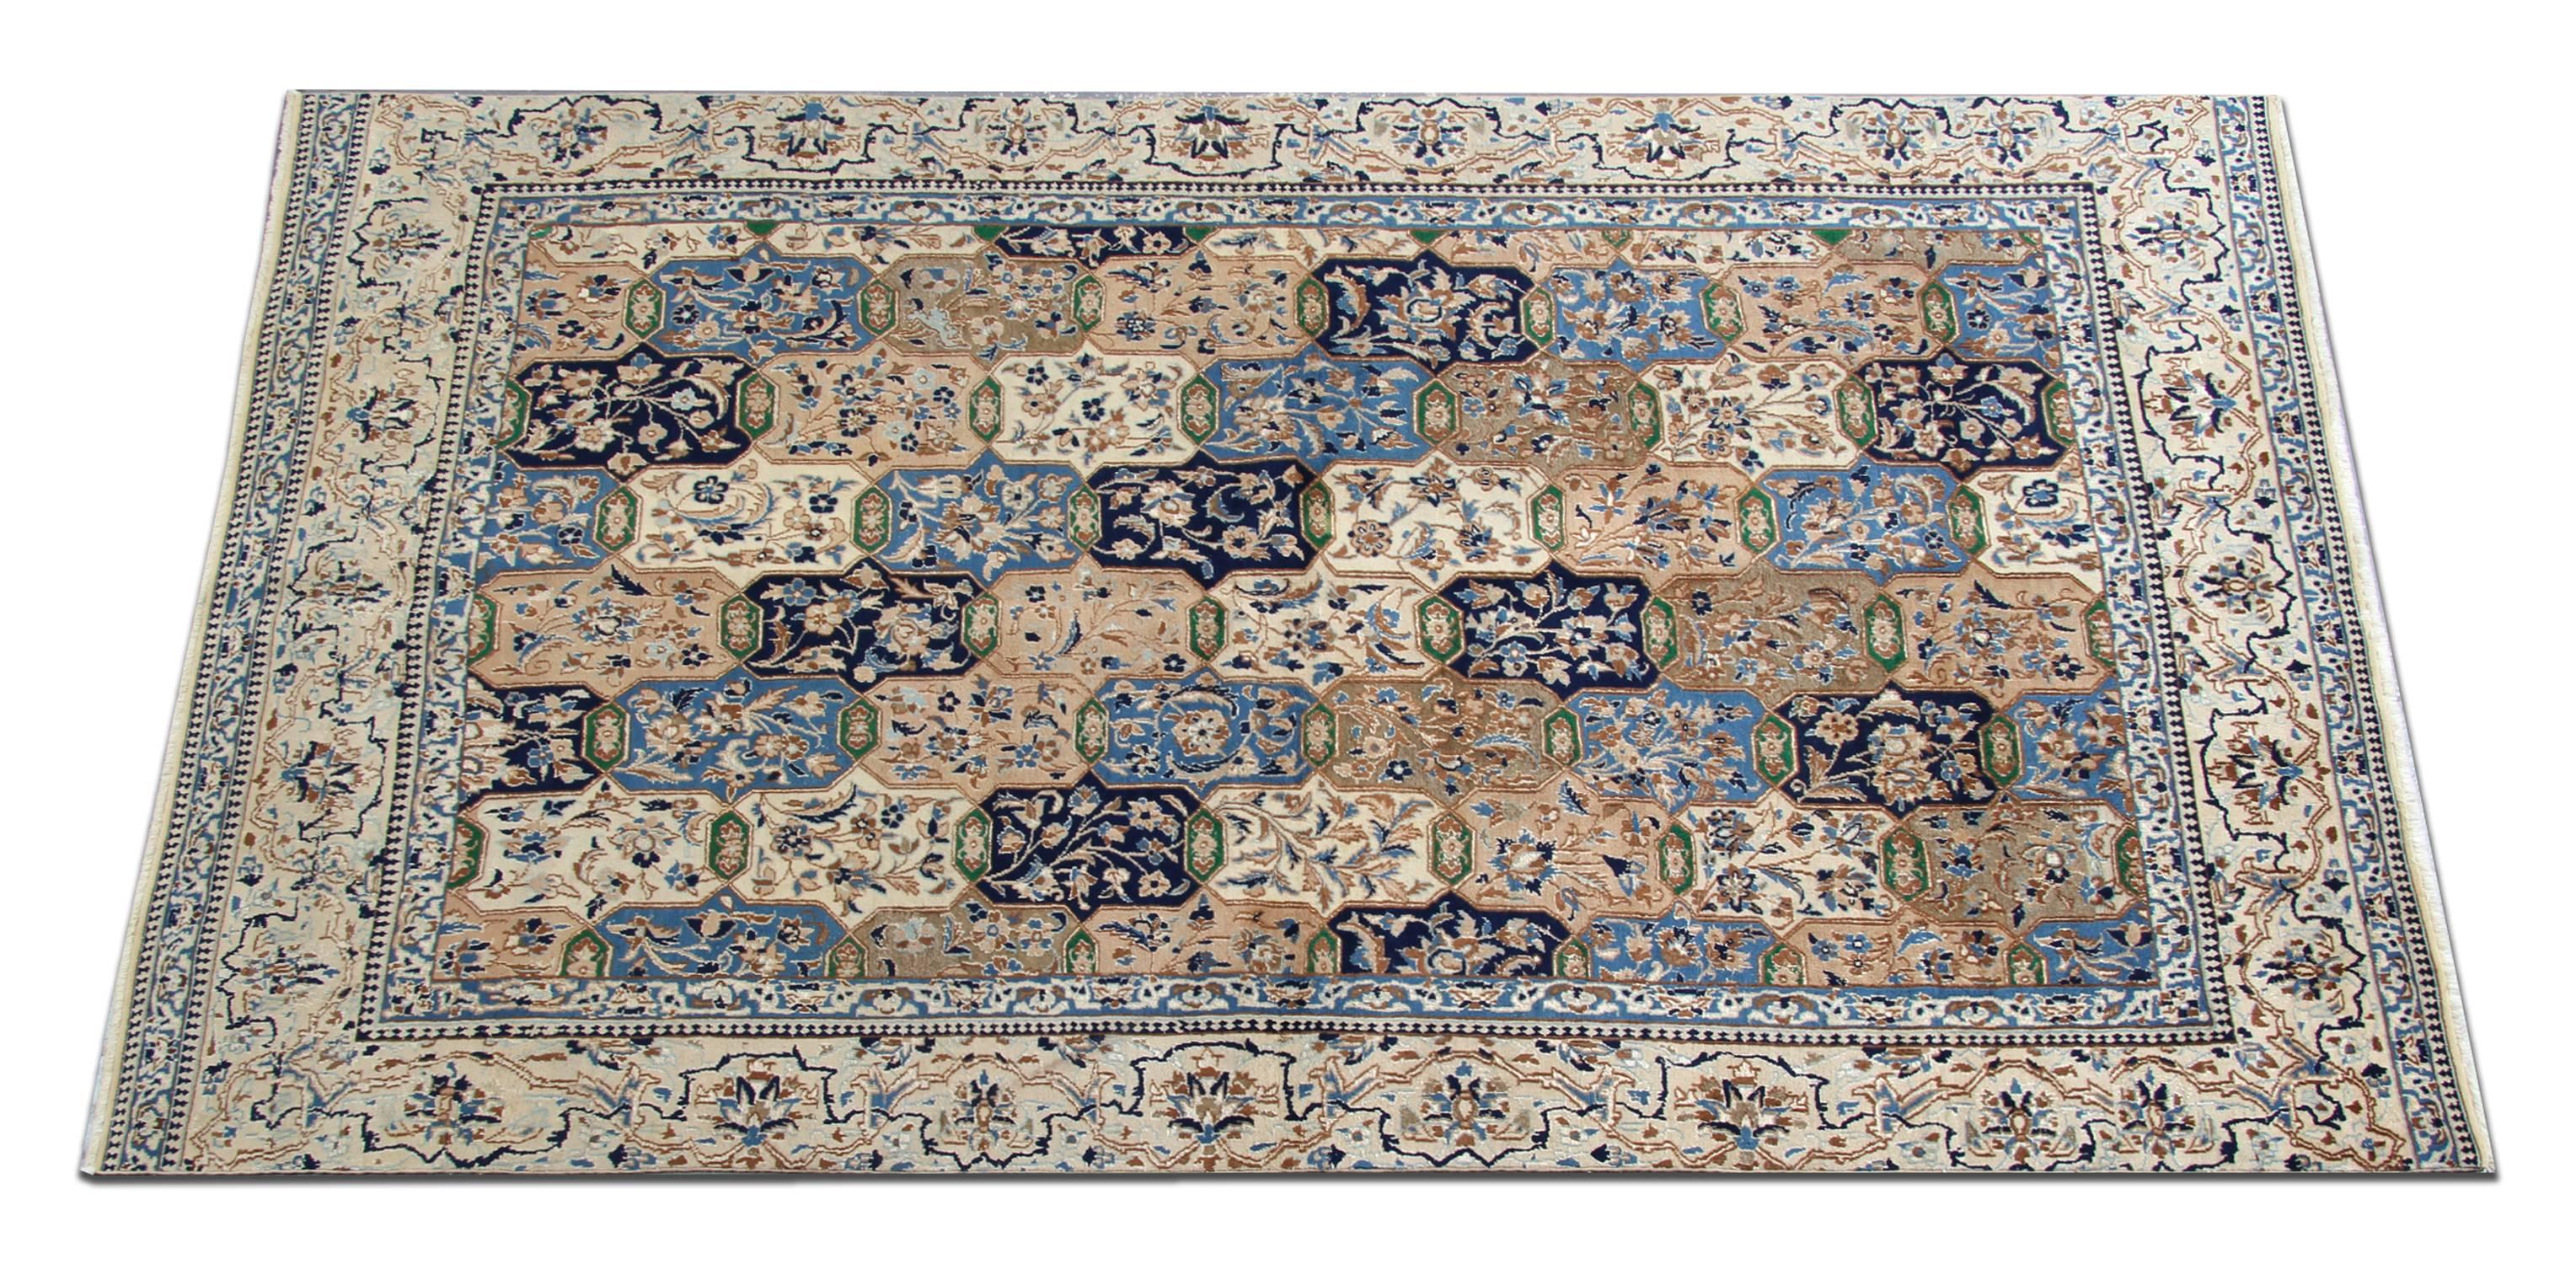 Handwoven with fine wool and a sophisticated color palette including blue cream and beige. The central design features a tile effect pattern with floral and geometric motifs, this is then framed by a decorative border which encloses the design. The